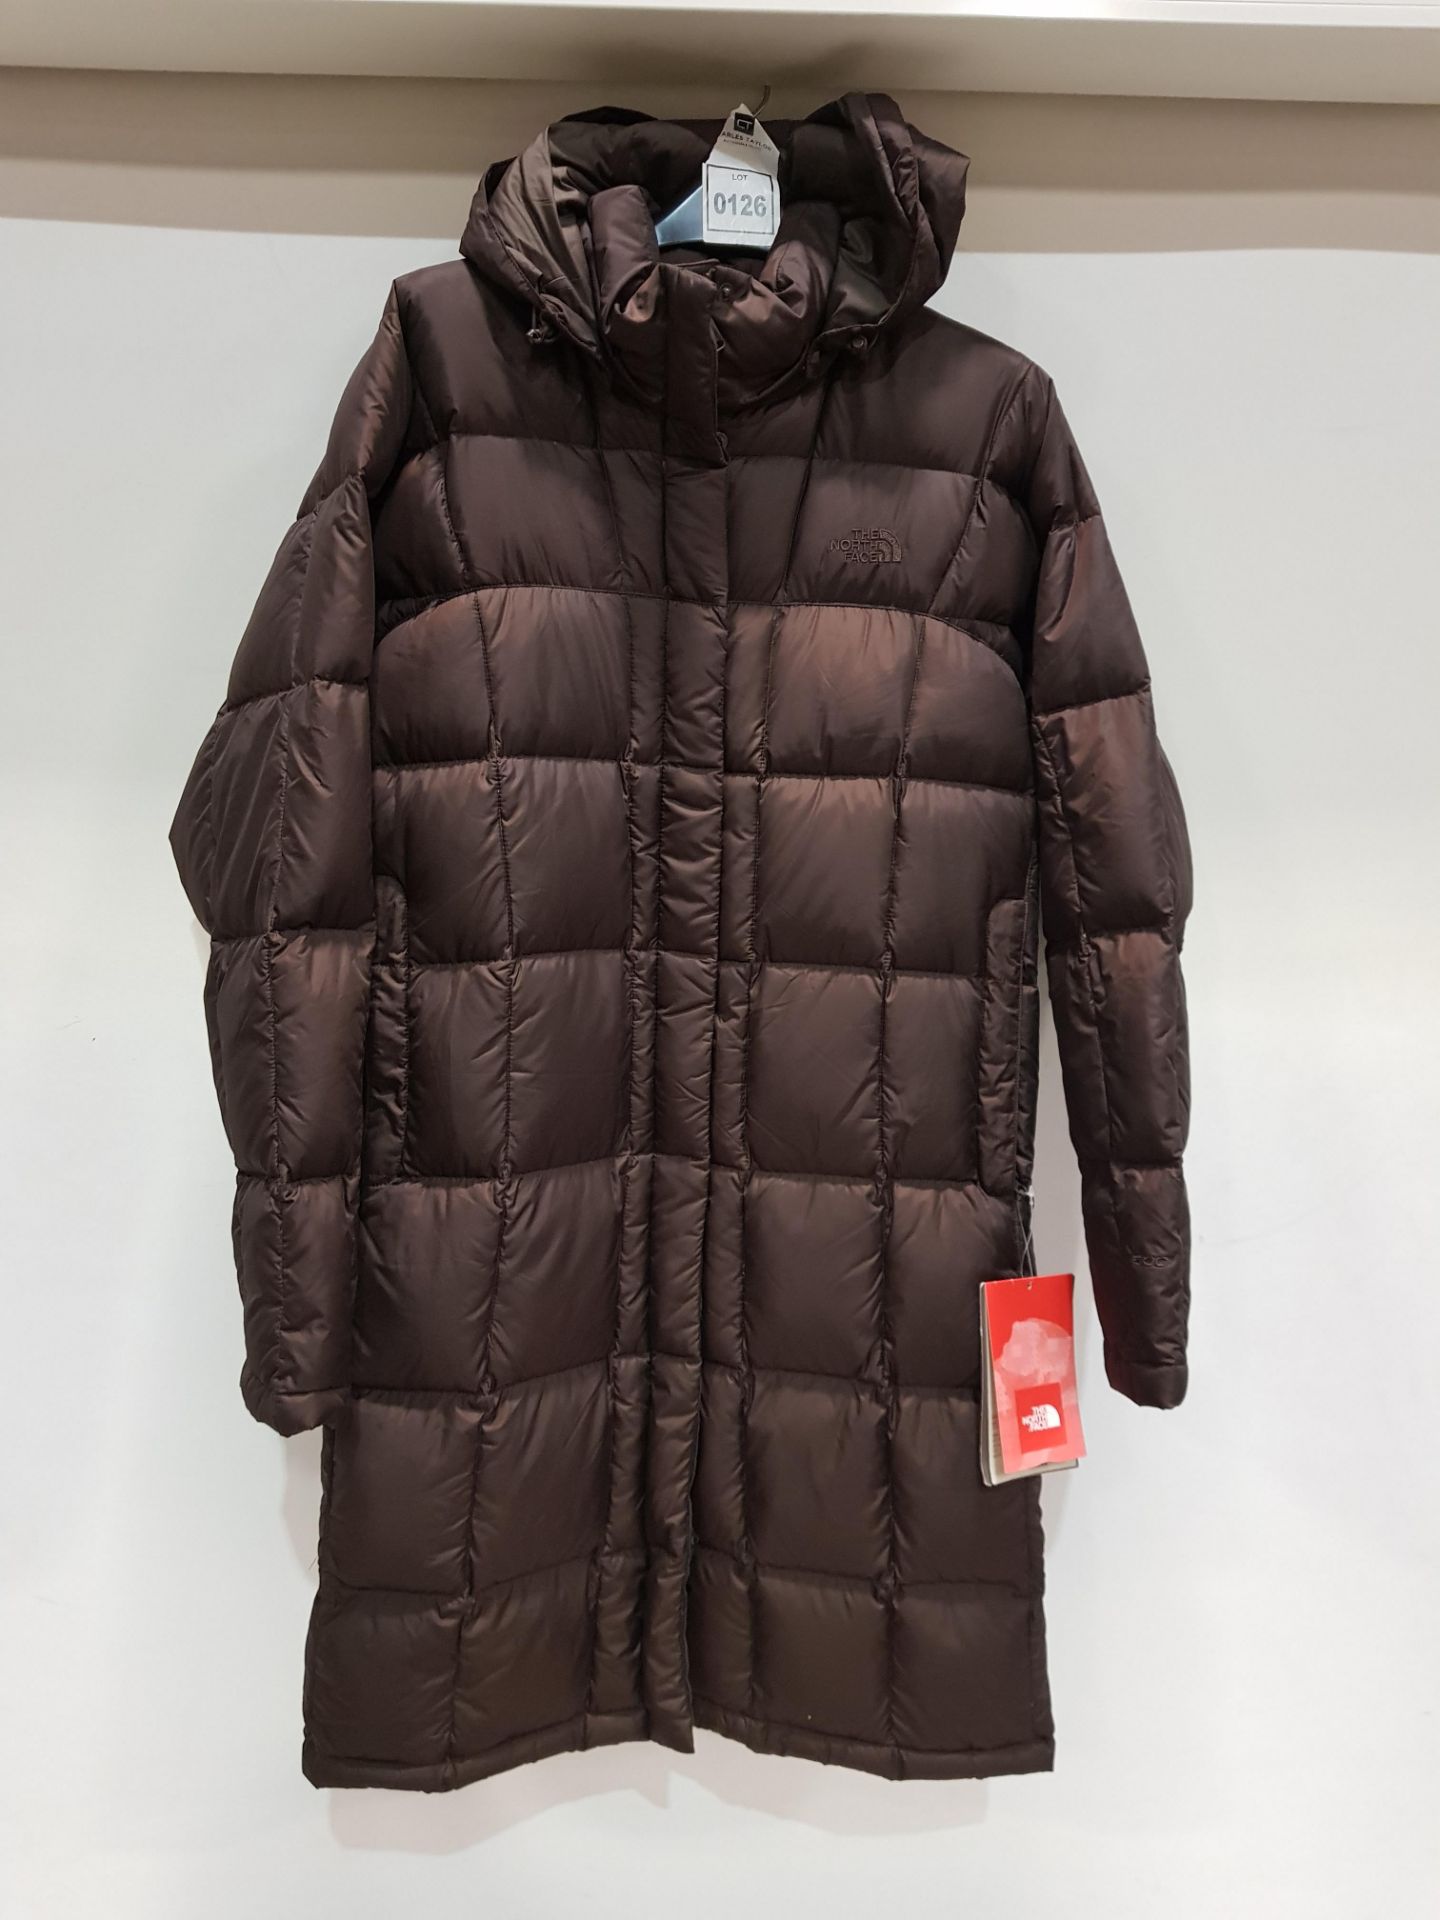 1 X BRAND NEW THE NORTH FACE METROPOLIS PARKA IN BROWNIE BROWN SIZE X LARGE - WITH TAGS